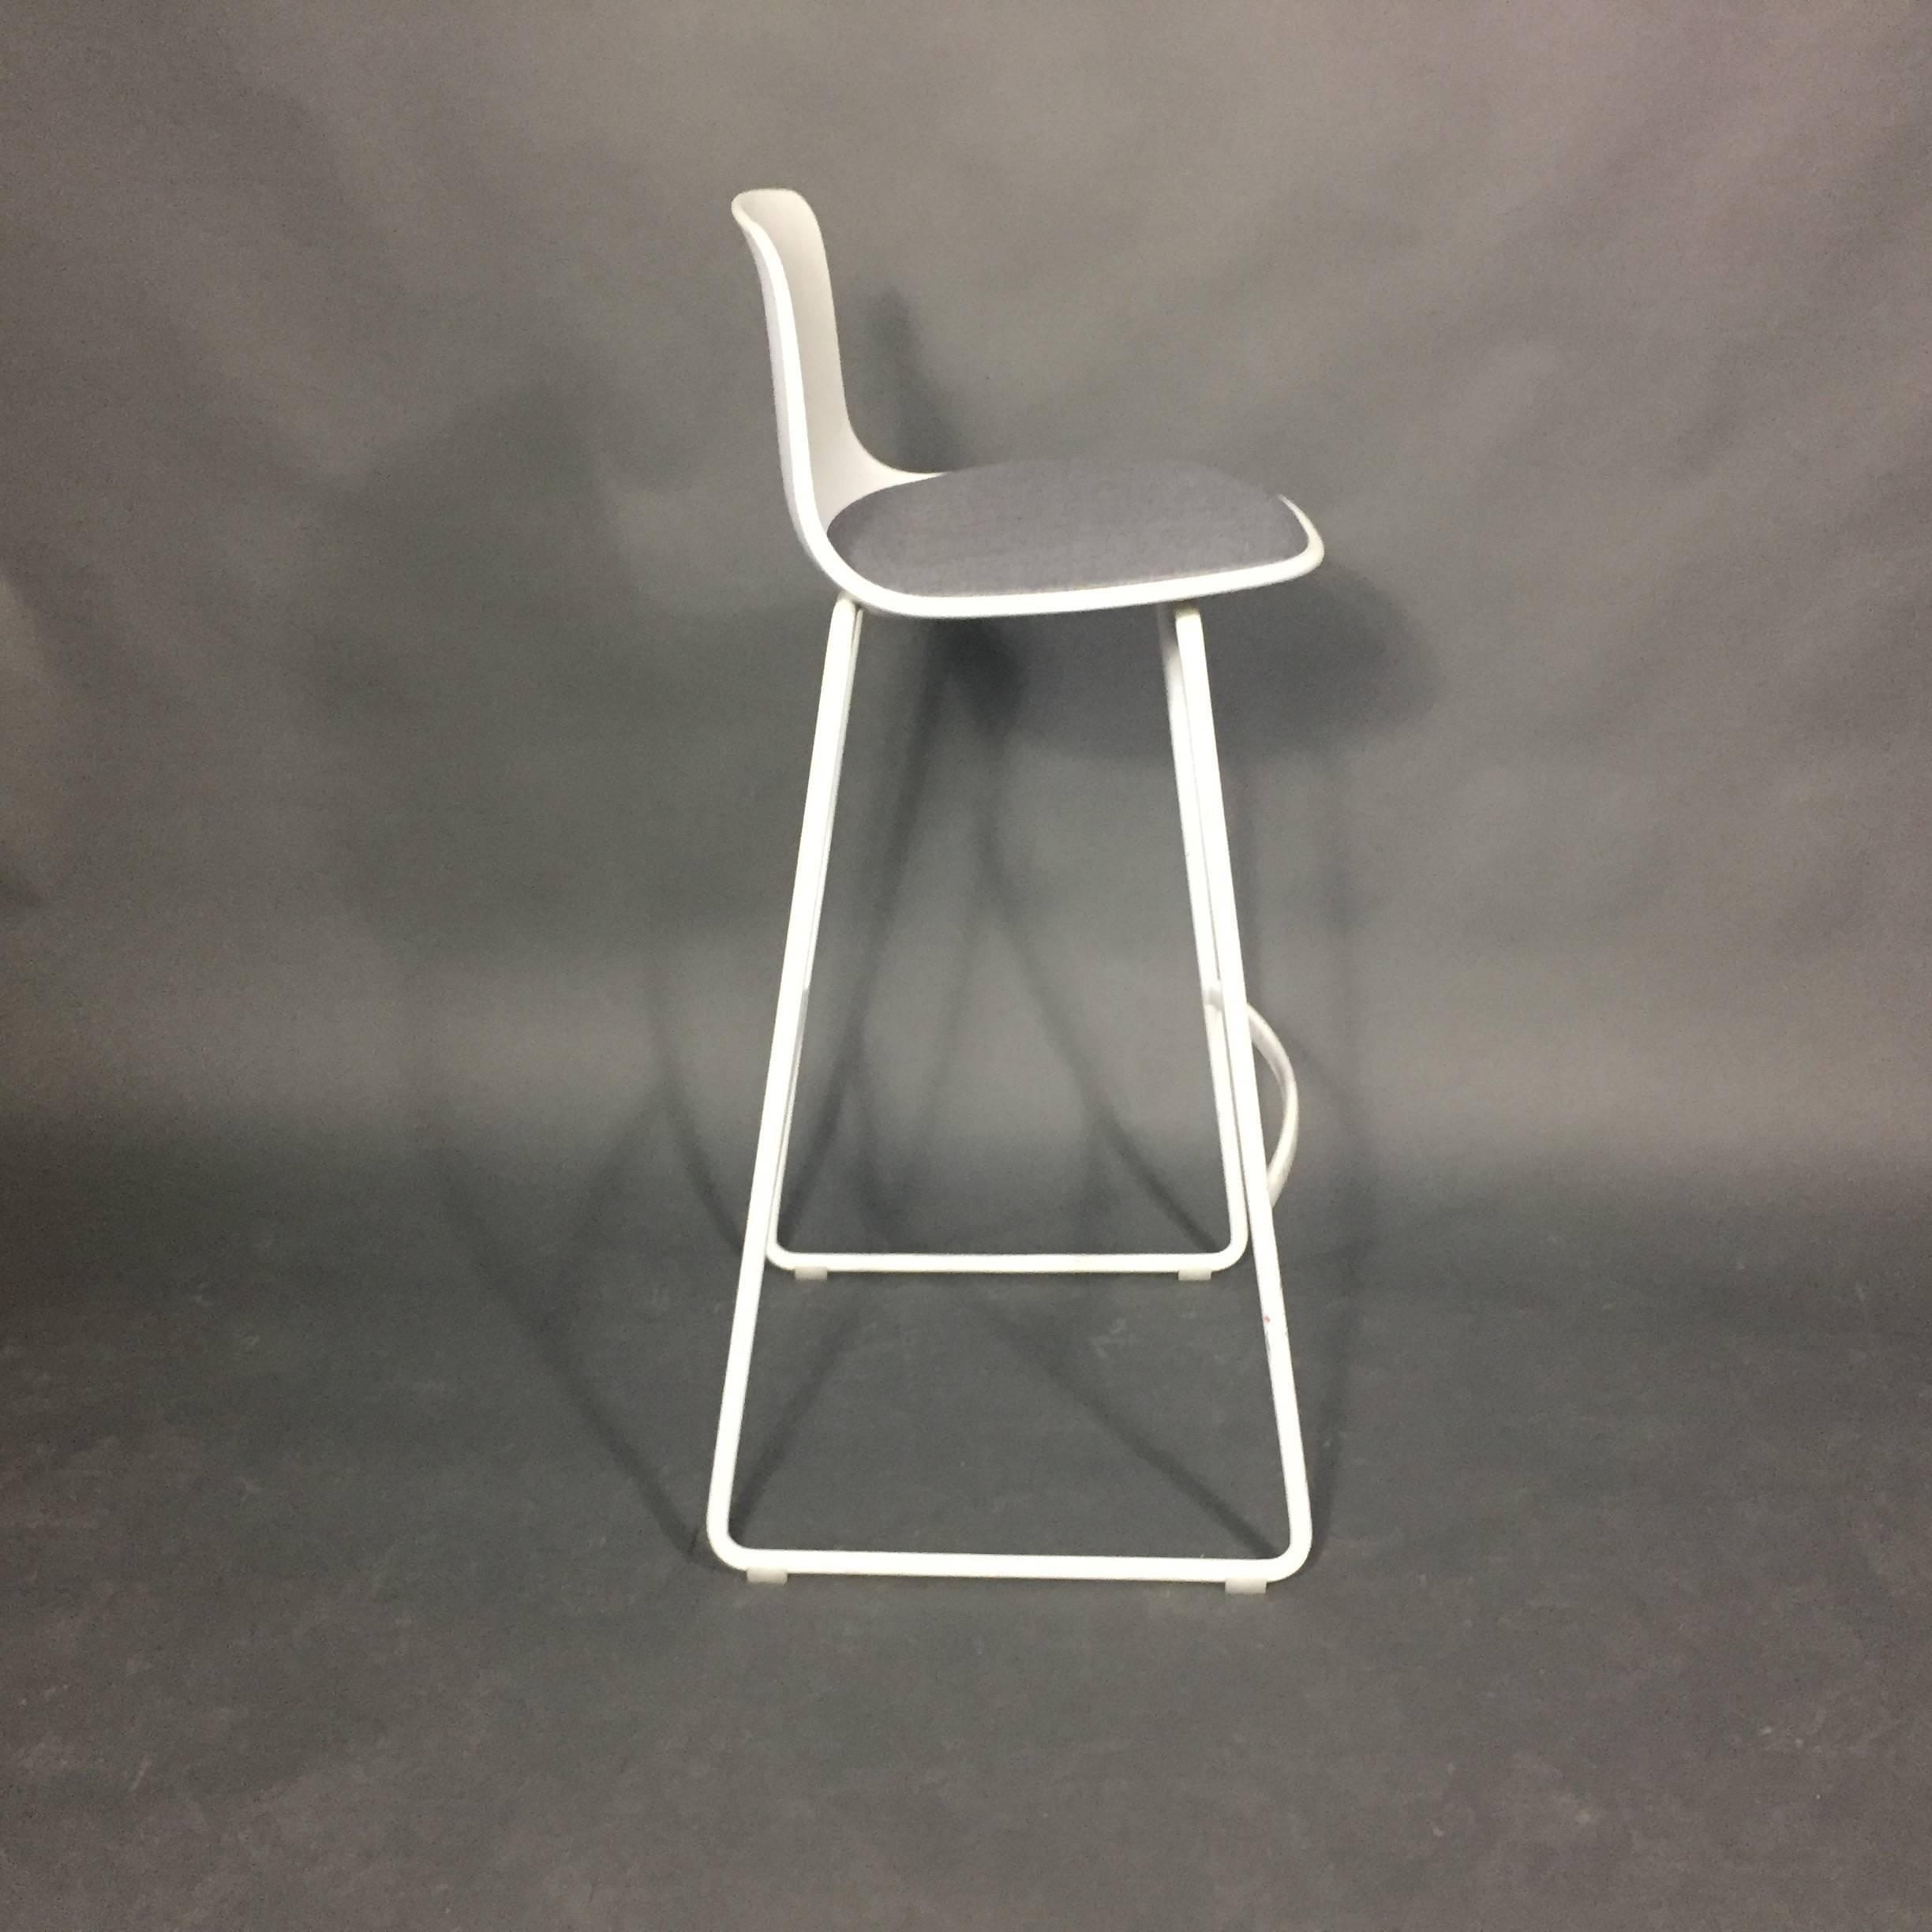 Enea Lotus Bar Stools by Lievore Altherr Molina, Spain For Sale 1